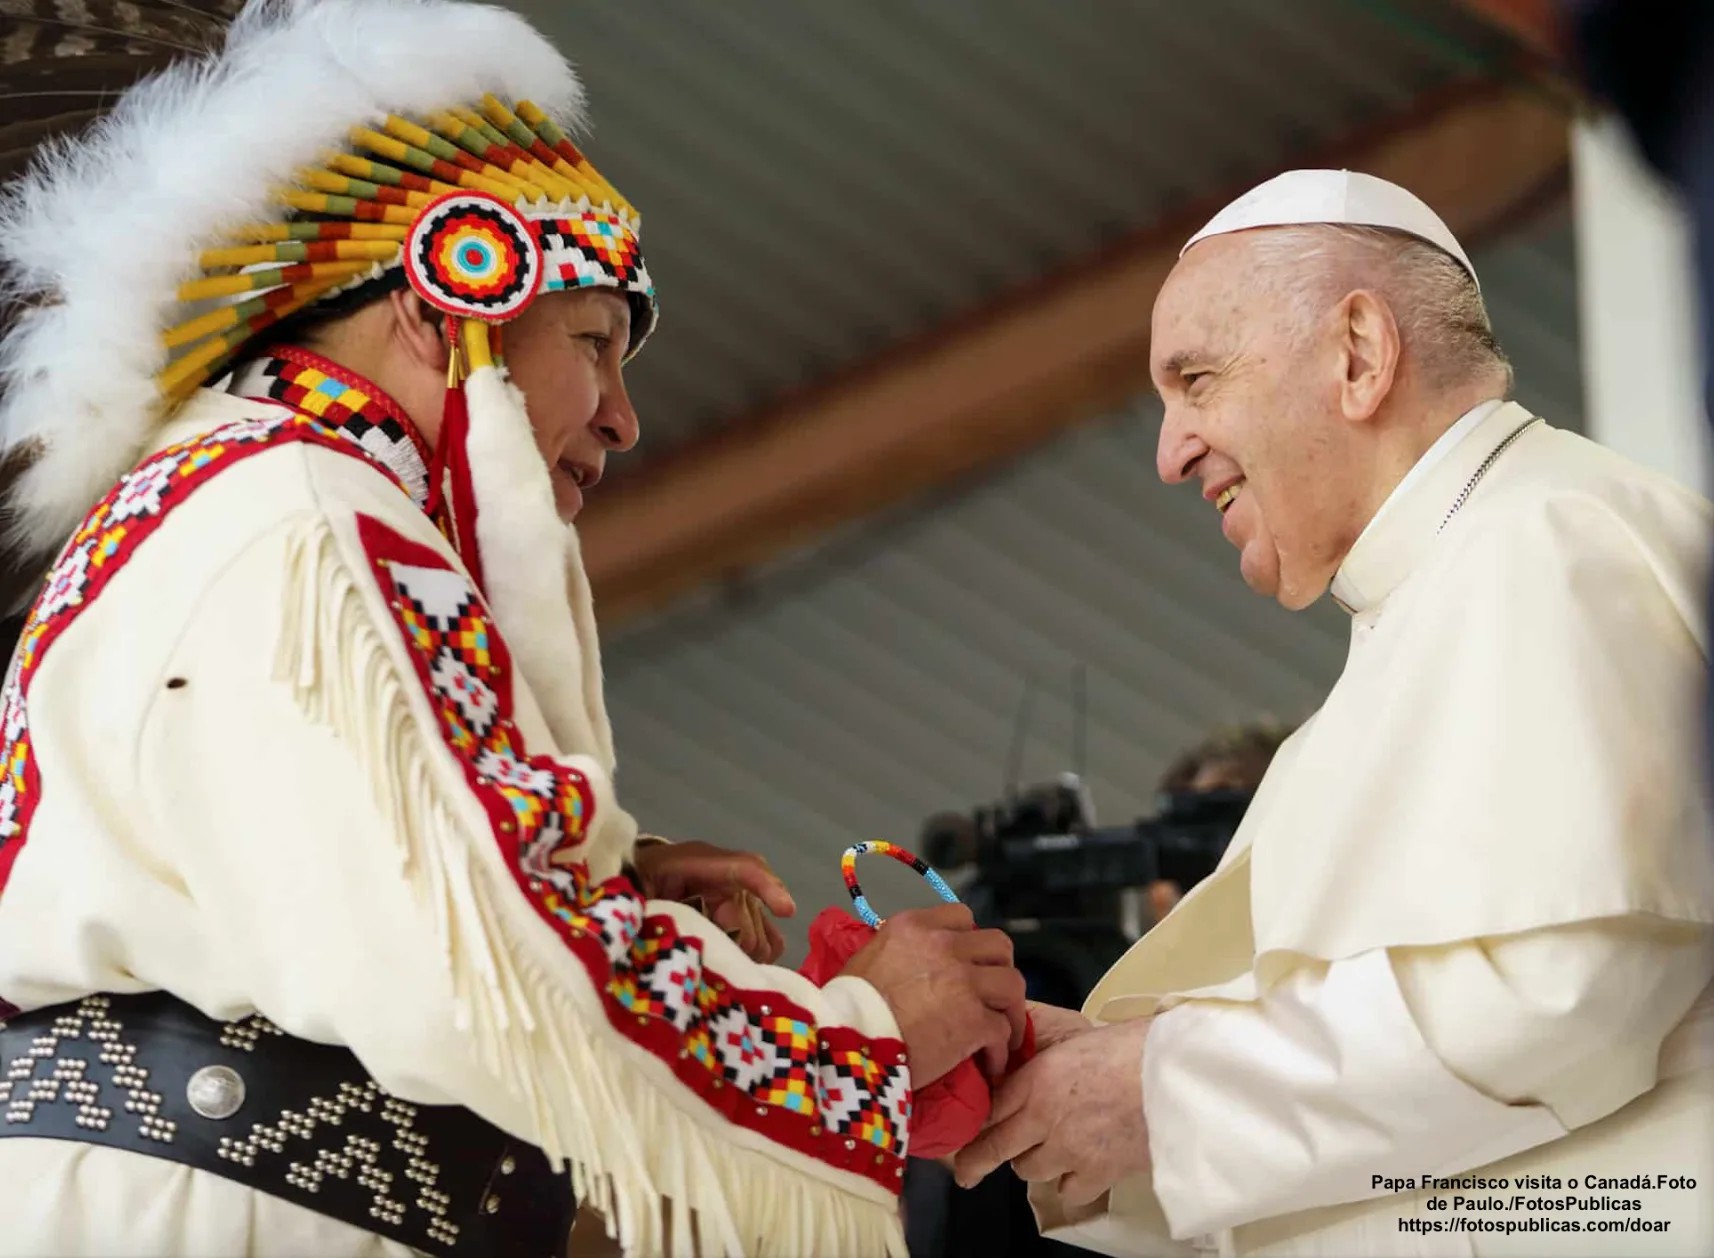 Pope Francis’ “Penance Journey” to Canada